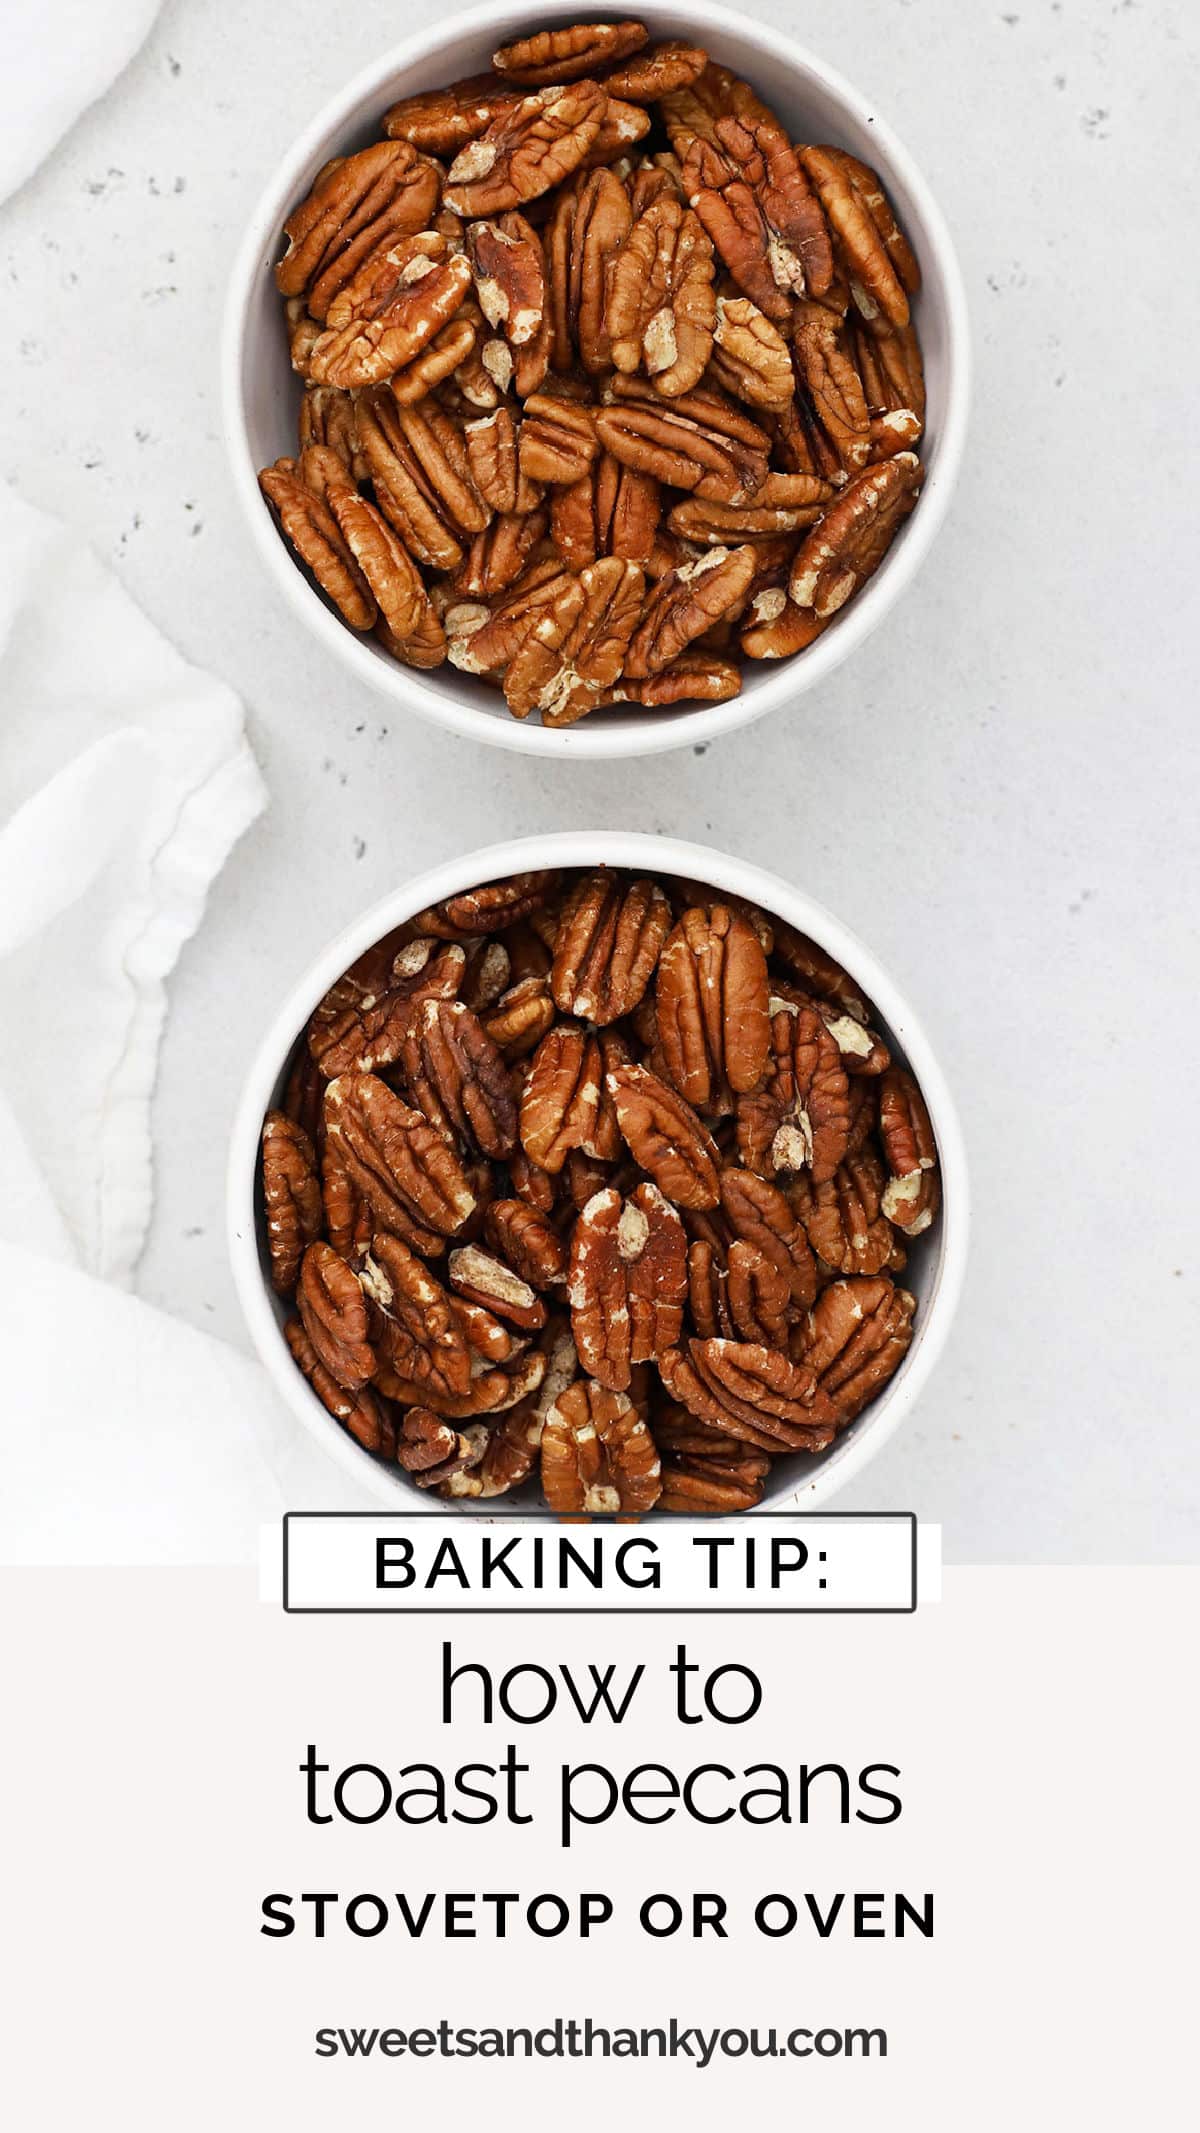 Wondering how to toast pecans? We'll walk you through 2 ways! Learn how to toast pecans in the oven or on the stovetop in this easy tutorial. / how to toast pecans oven directions / how to toast pecans on the stove / how to roast pecans / how long to toast pecans / how to toast pecans in a pan / how to make toasted pecans / baking tips / 